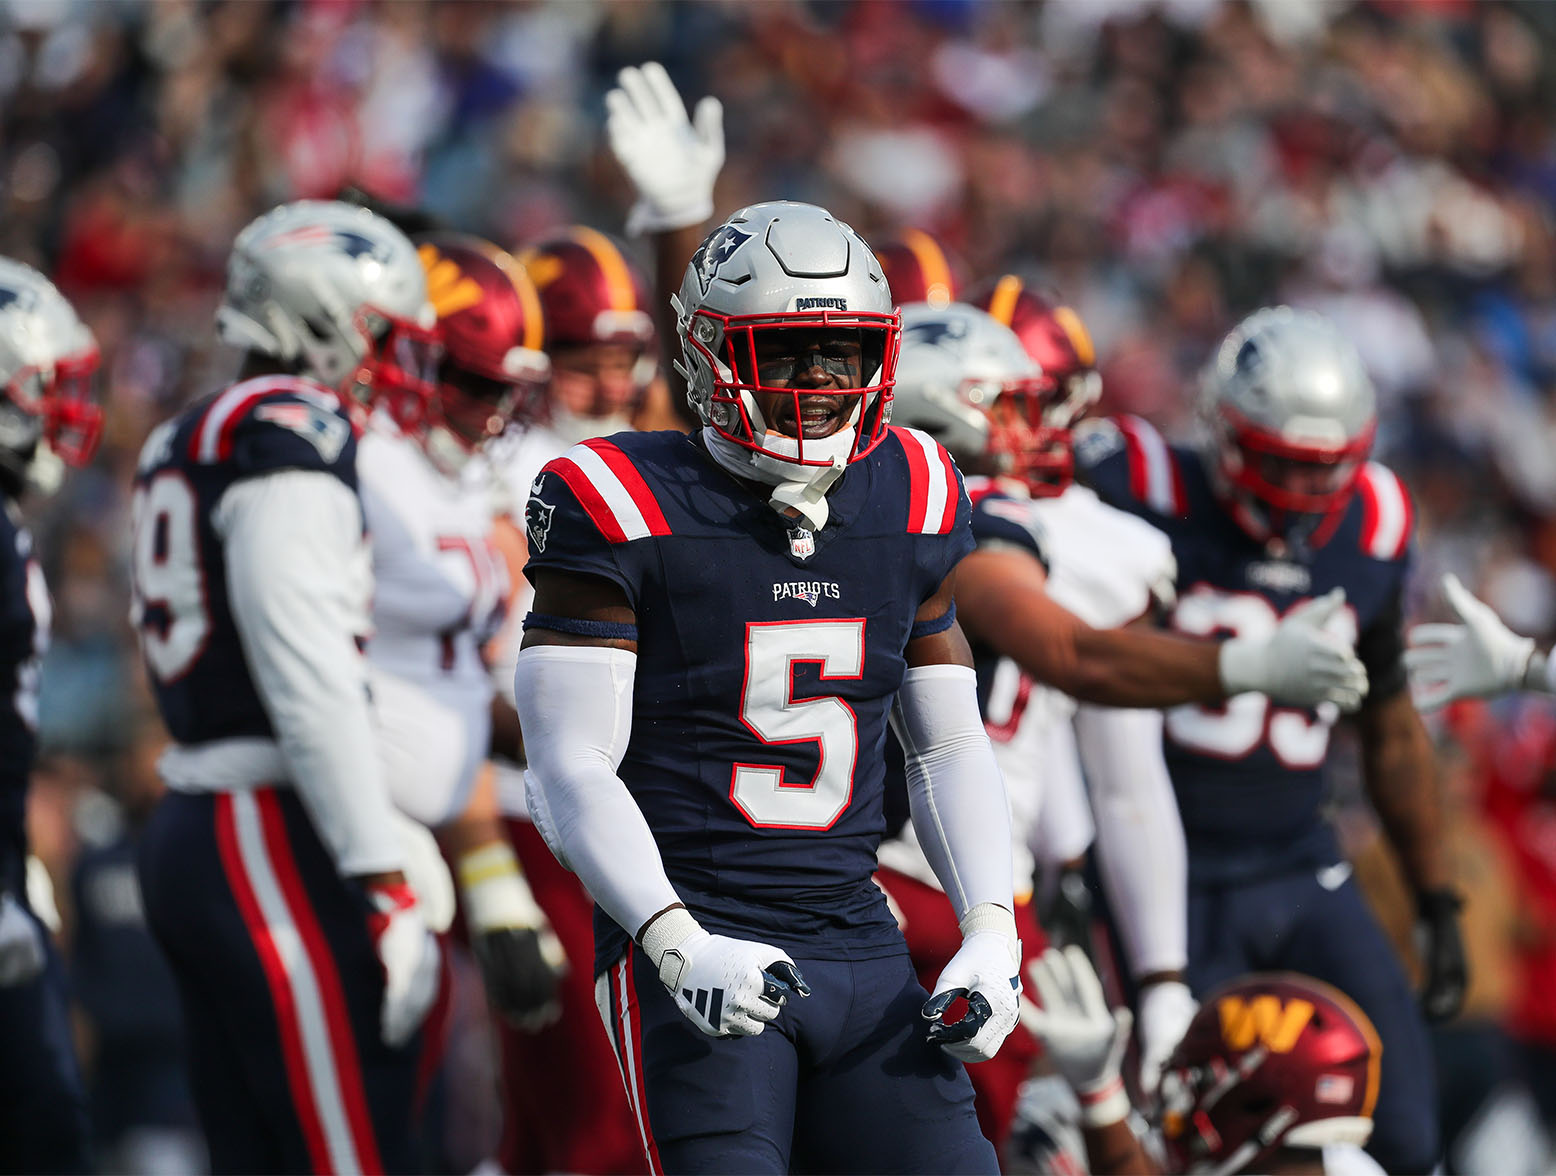 Nov 5, 2023; Foxborough, Massachusetts, USA; New England Patriots safety Jabrill Peppers (5) celebrates after a play against the Washington Commanders during the first half at Gillette Stadium. Credit: Paul Rutherford-USA TODAY Sports